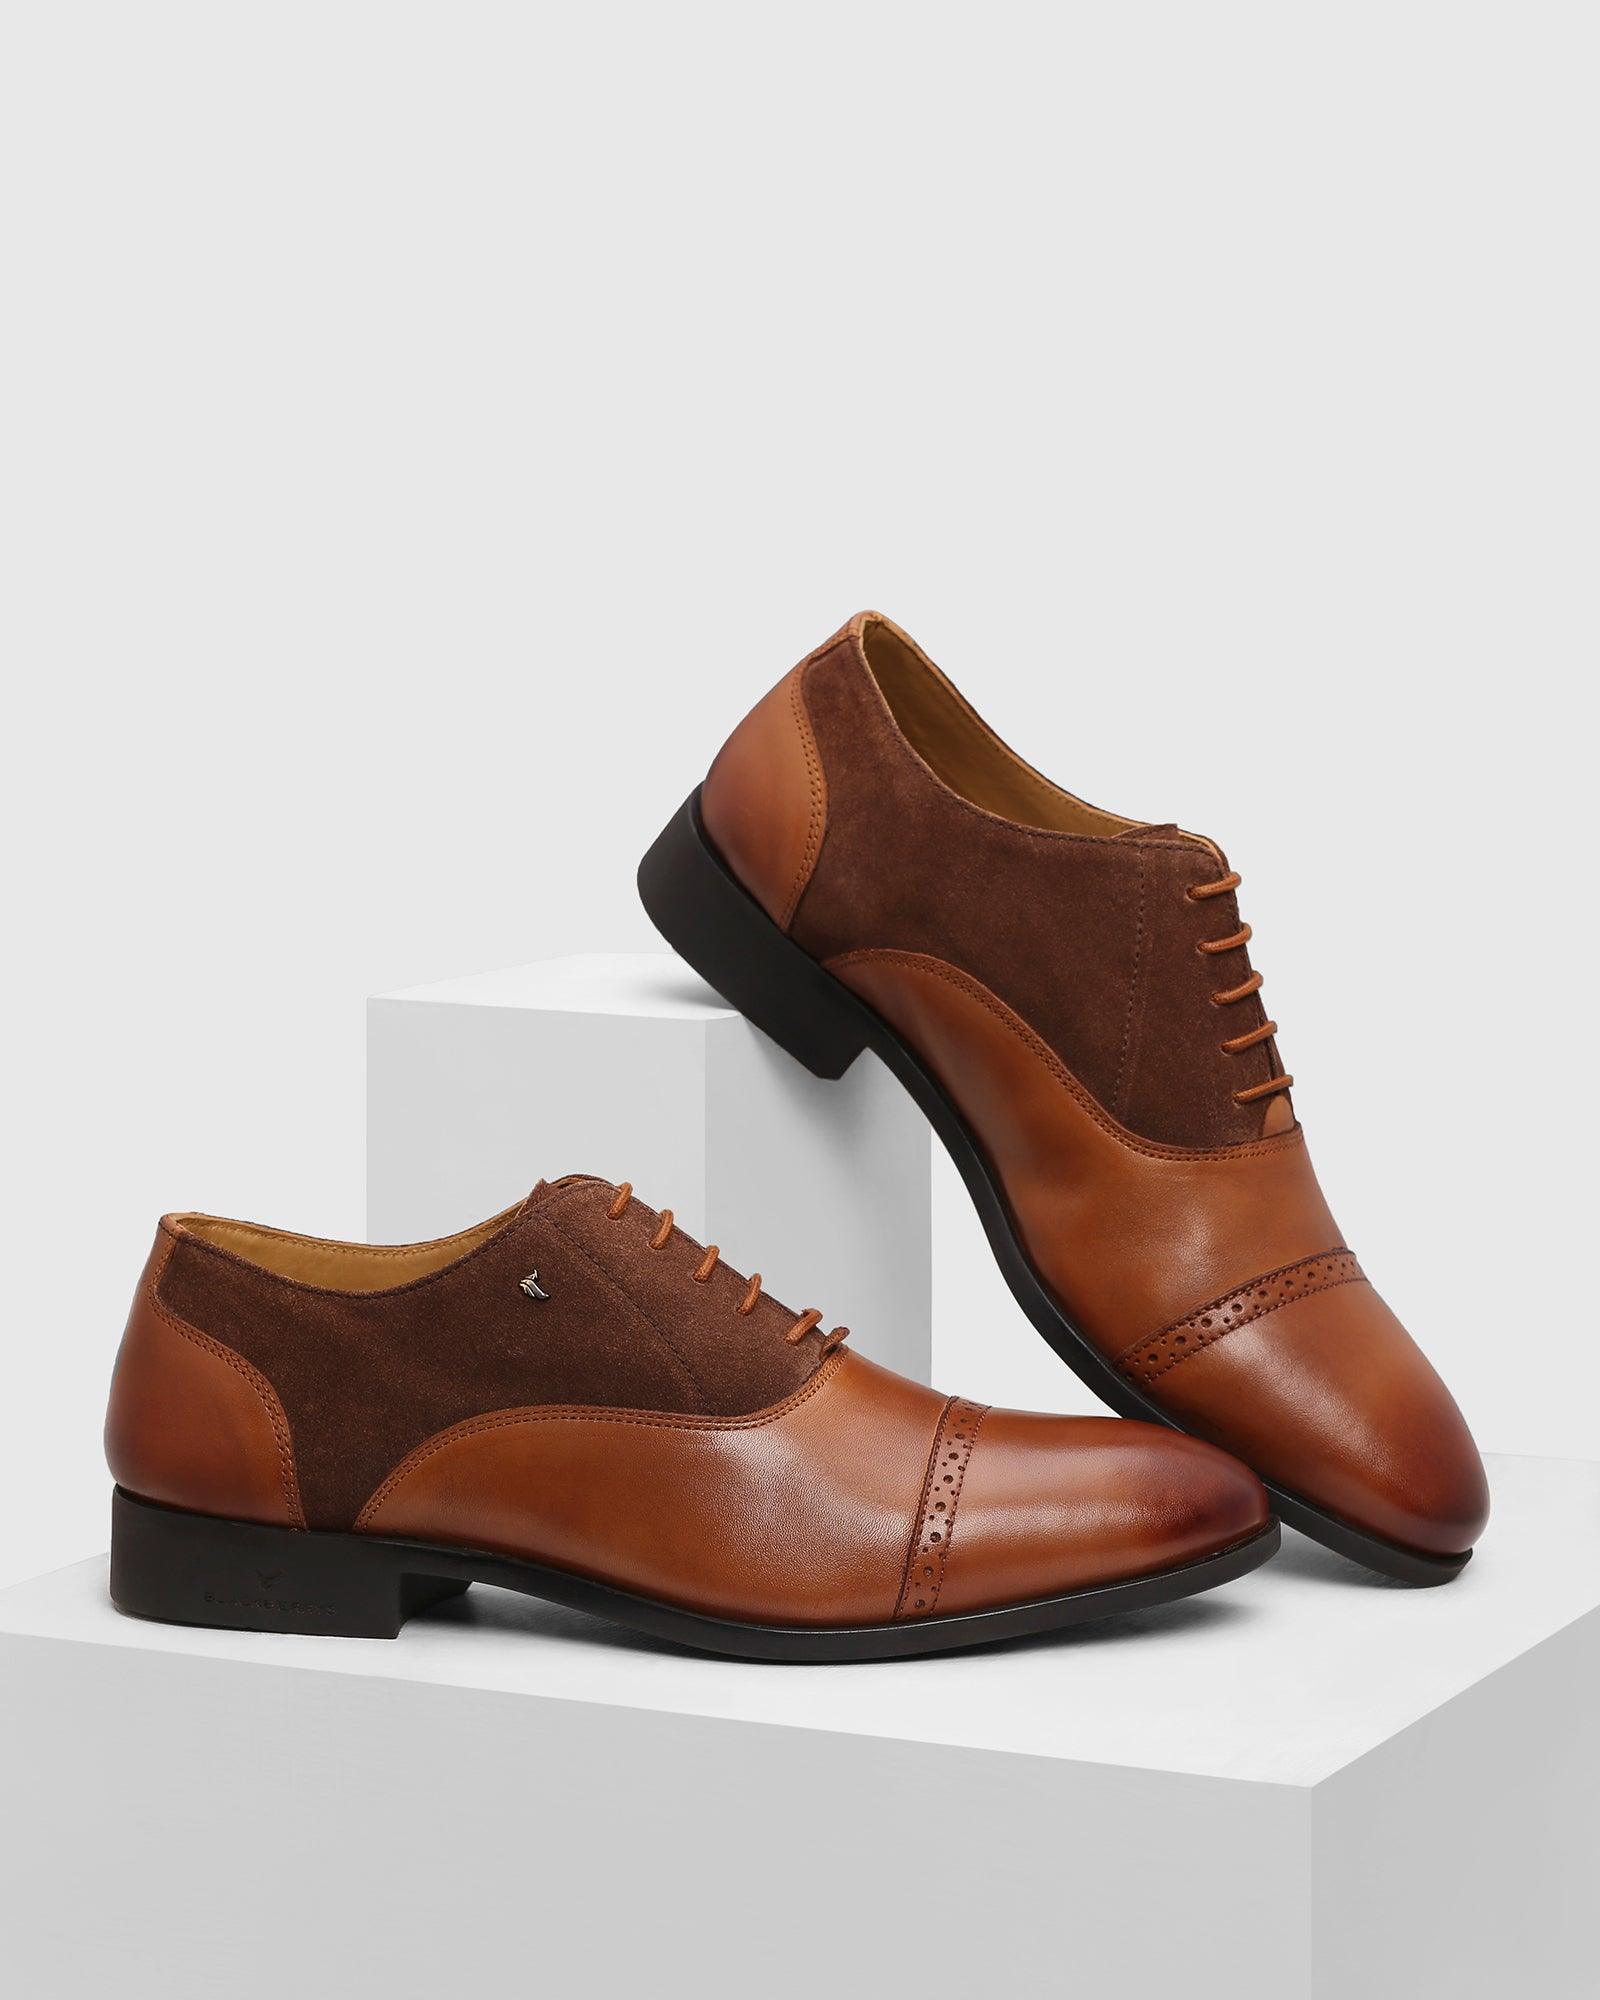 Leather Formal Tan Solid Oxford Shoes - Pager